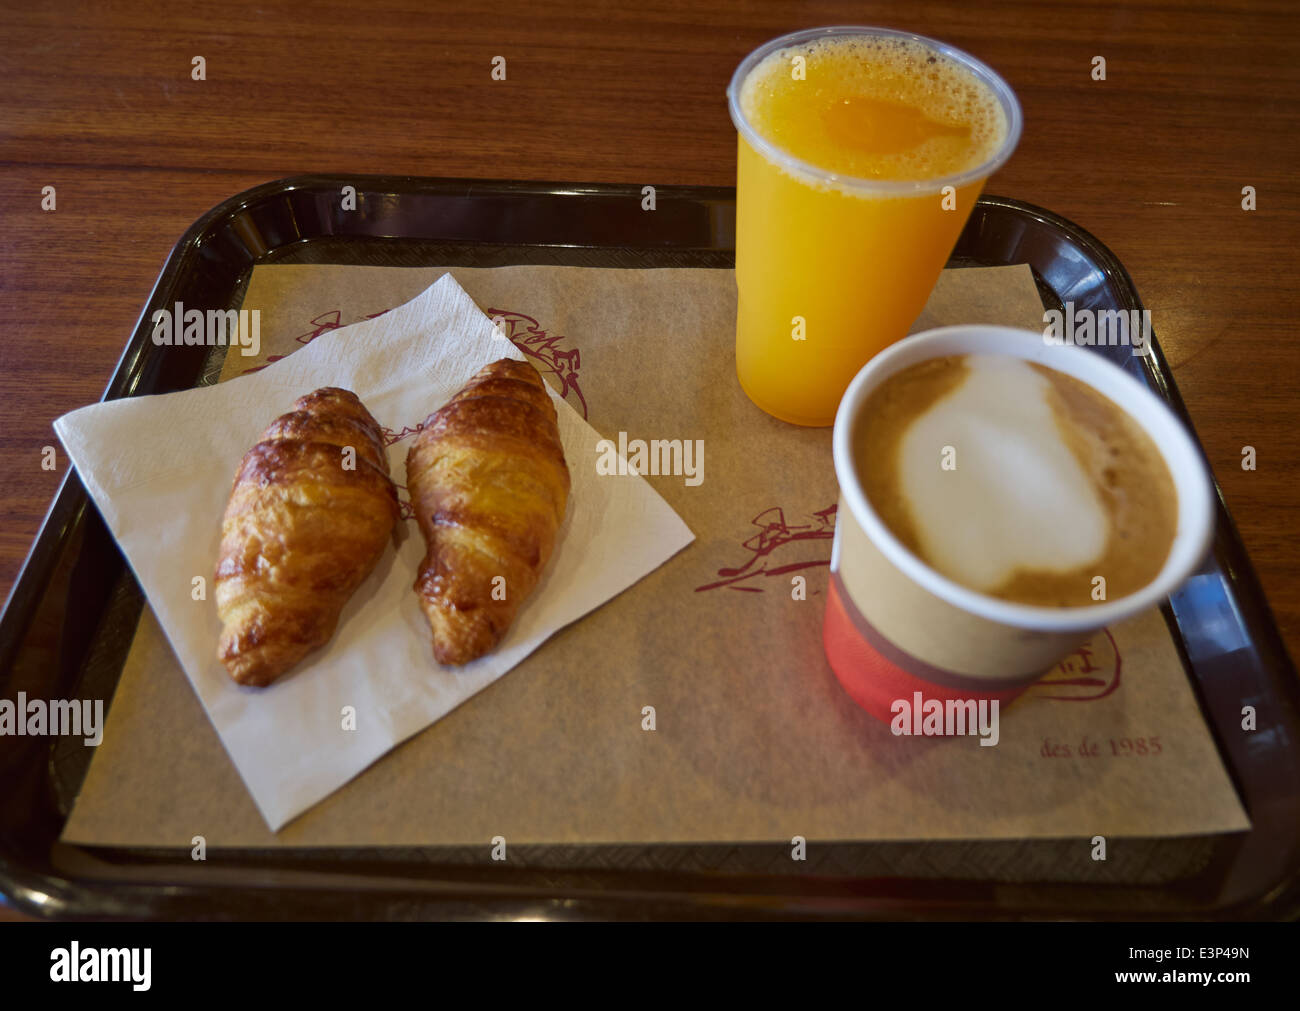 Simple breakfast of croissants, orange juice, and coffee from a cafe in Spain Stock Photo